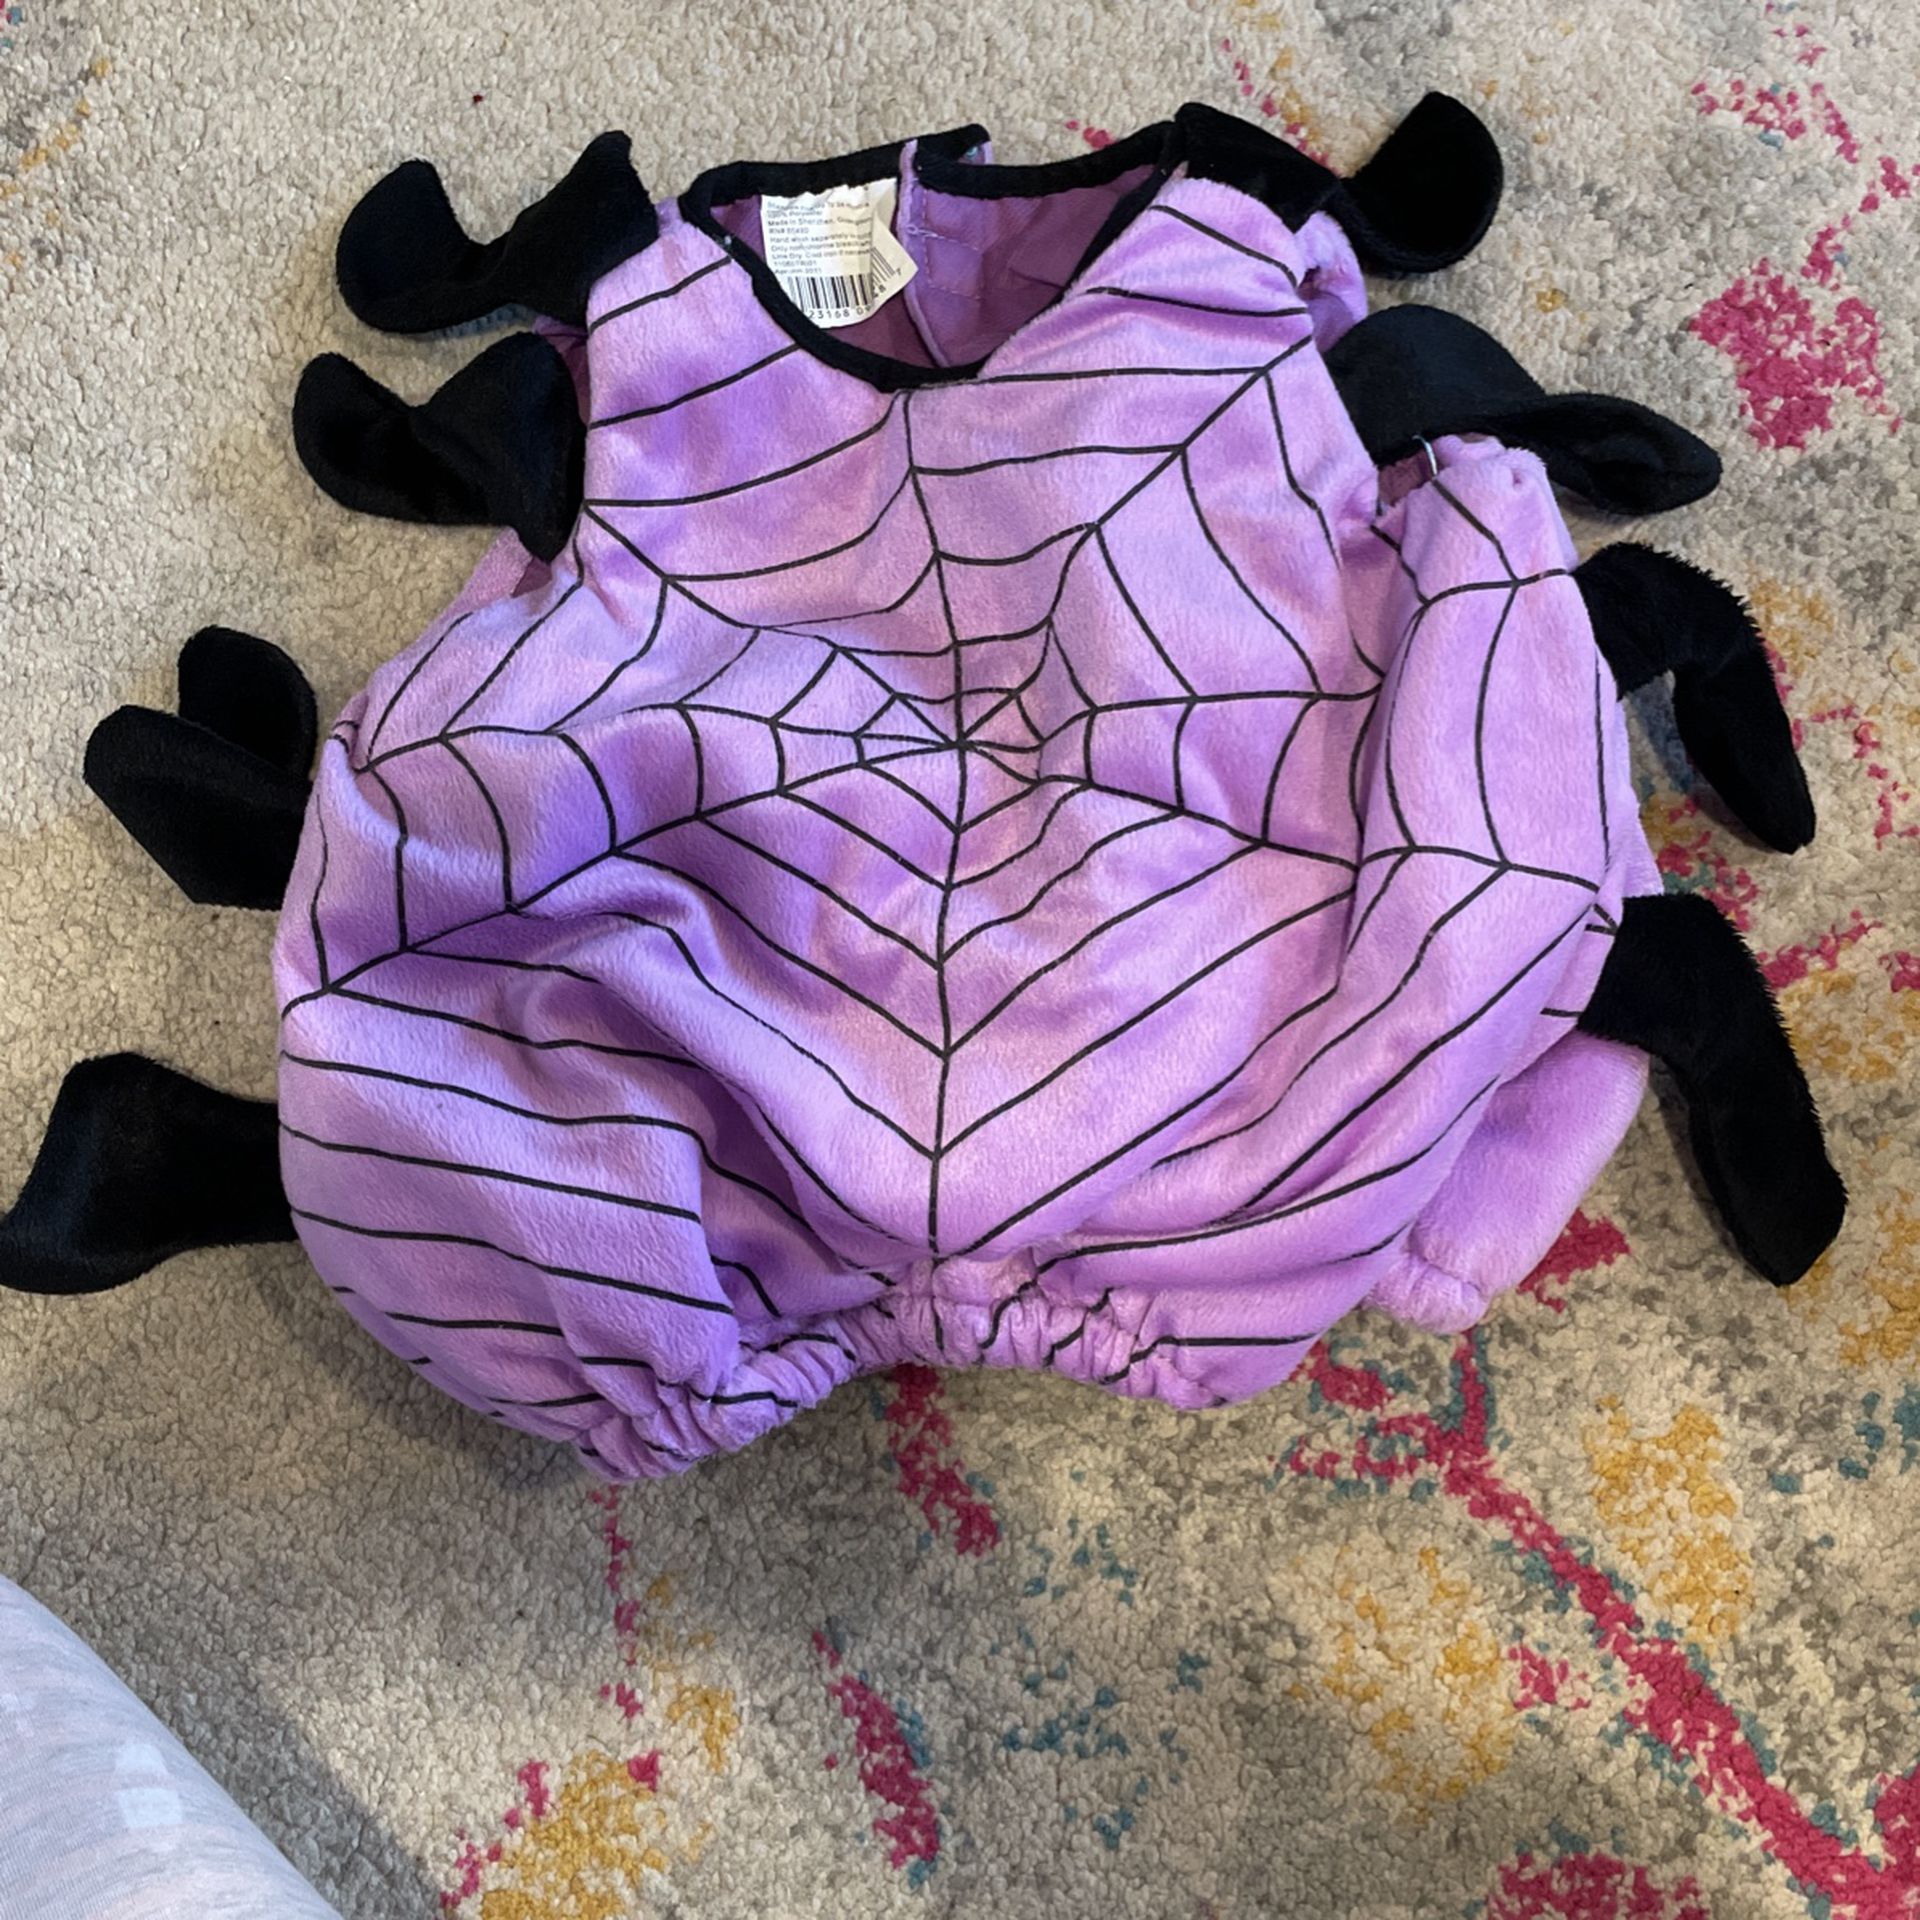 Spider Halloween costume one size fits up to 24 months